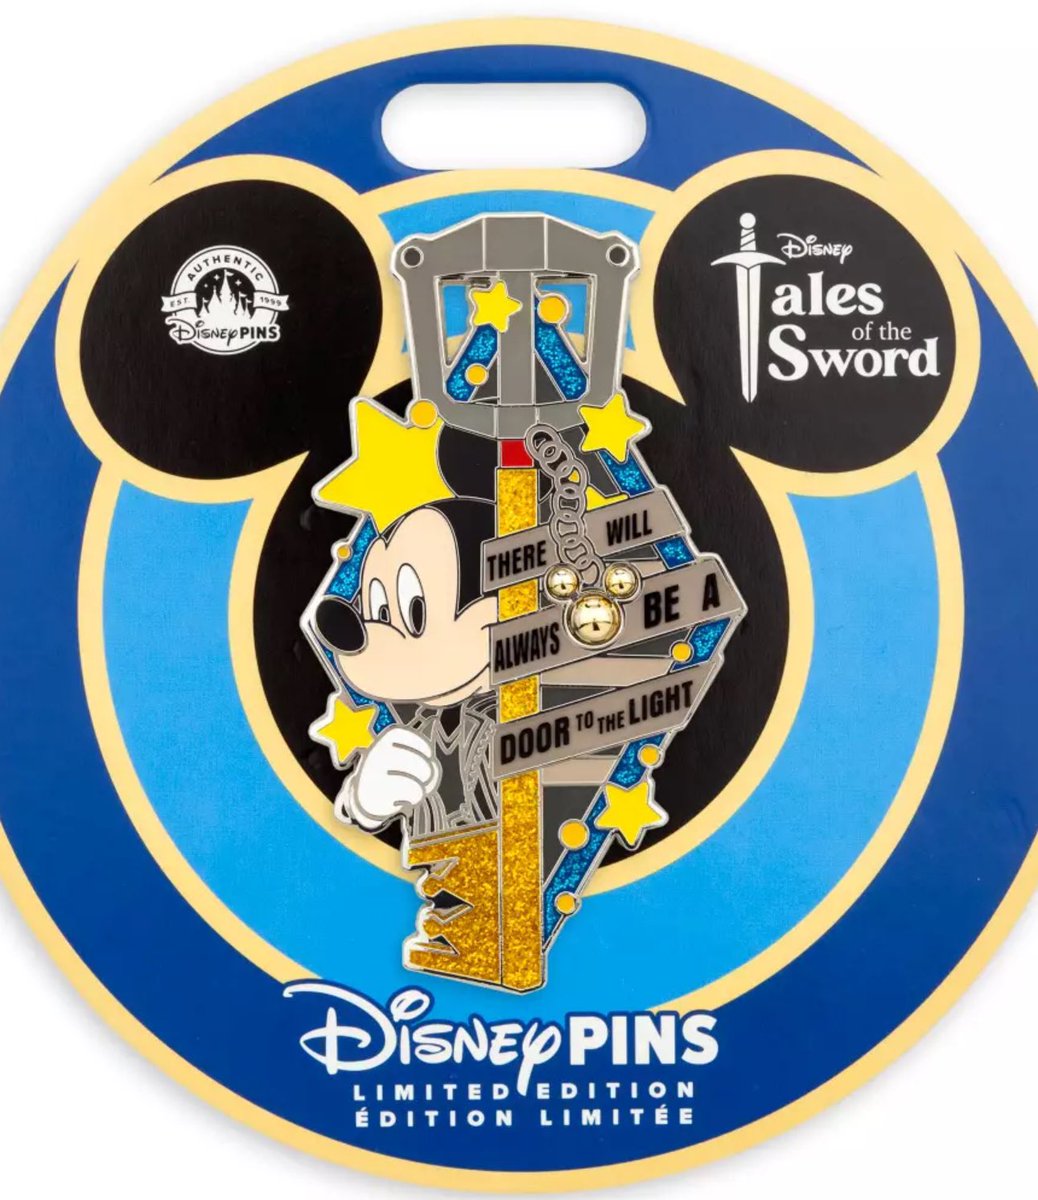 ShopDisney has the new KINGDOM HEARTS pin from the limited edition “Tales of the Sword” collection! It’s priced at $21.99! #kingdomhearts #キングダムハーツ #KHMerch #_KH Link: disneystore.com/mickey-mouse-j…